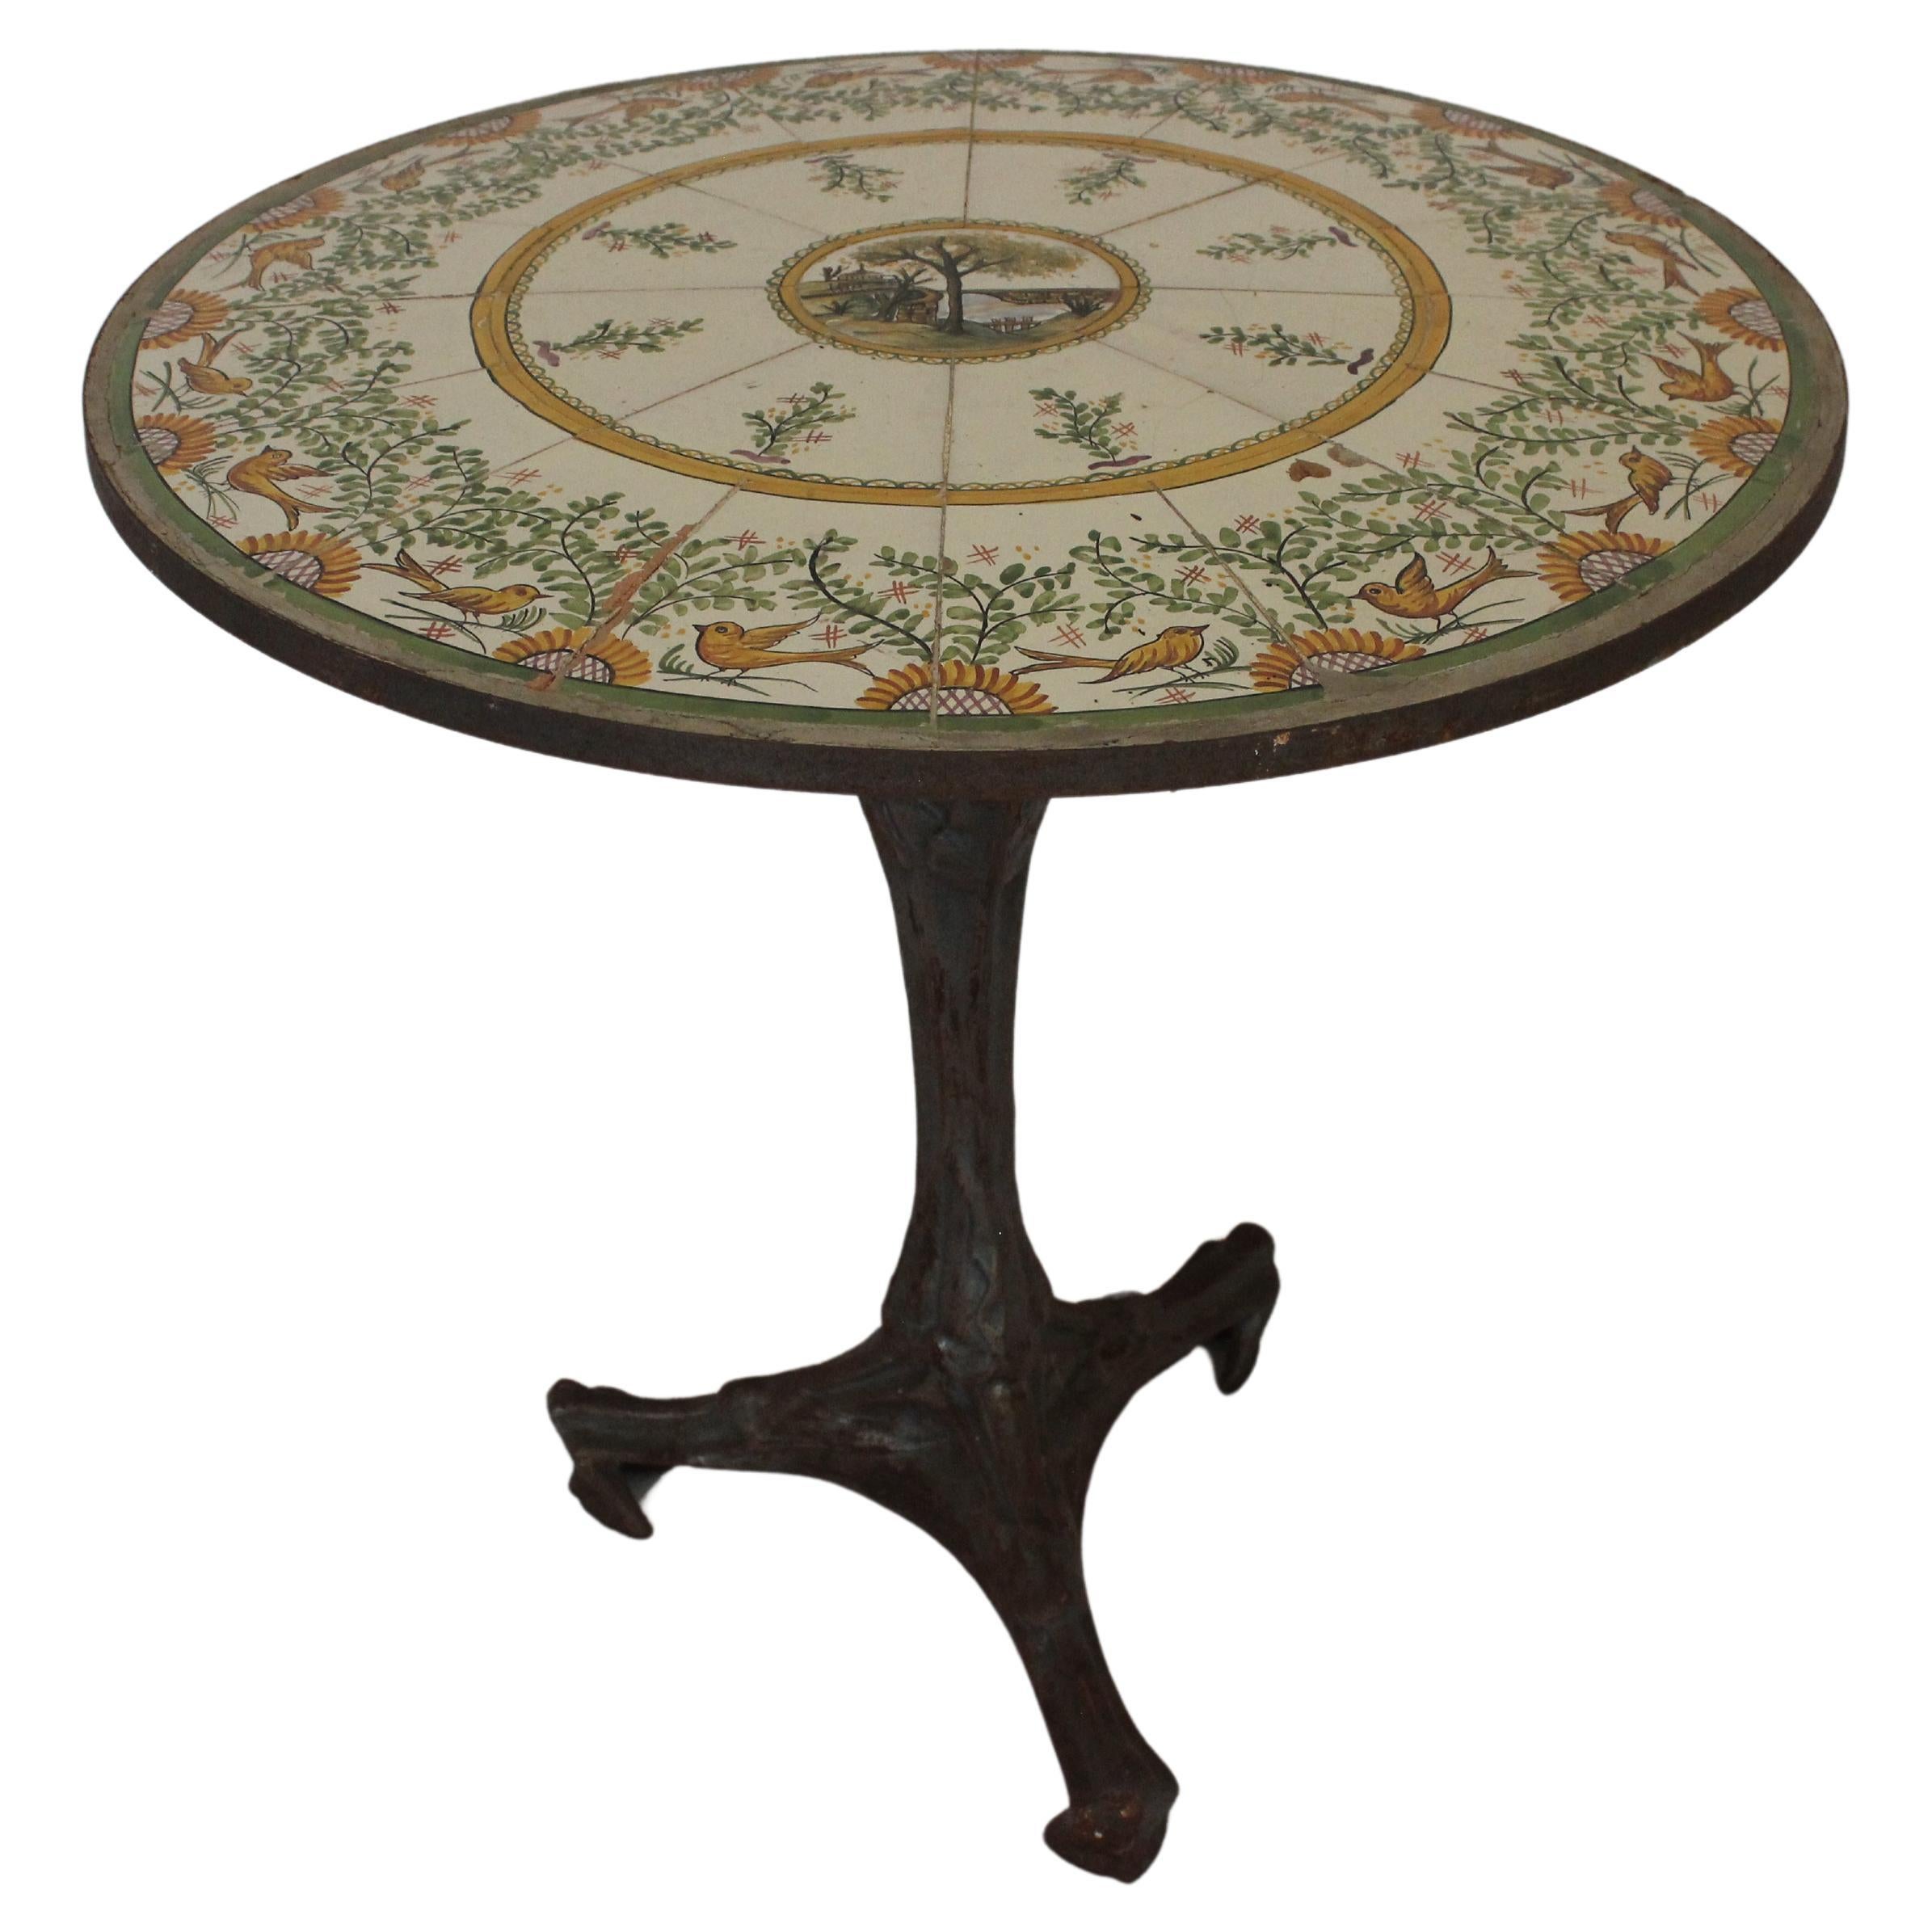 Early 20th Century Hand Painted Italian Tile Table with Art Nouveau Iron Base For Sale